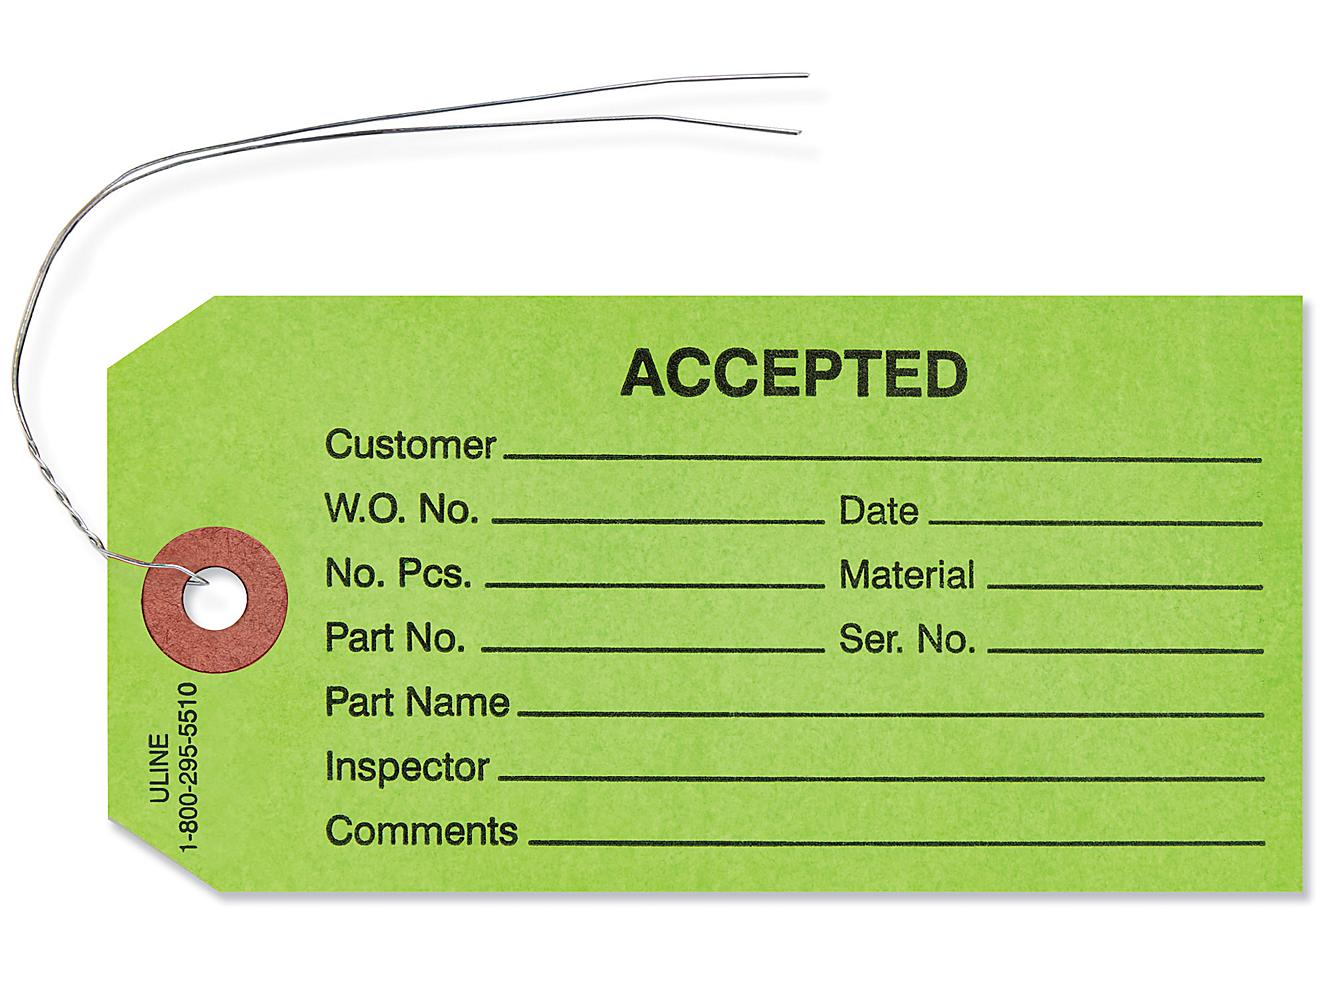 Green Inspection Tags Pre-Wired,Accepted 1000/Case 4 3/4 x 2 3/8 